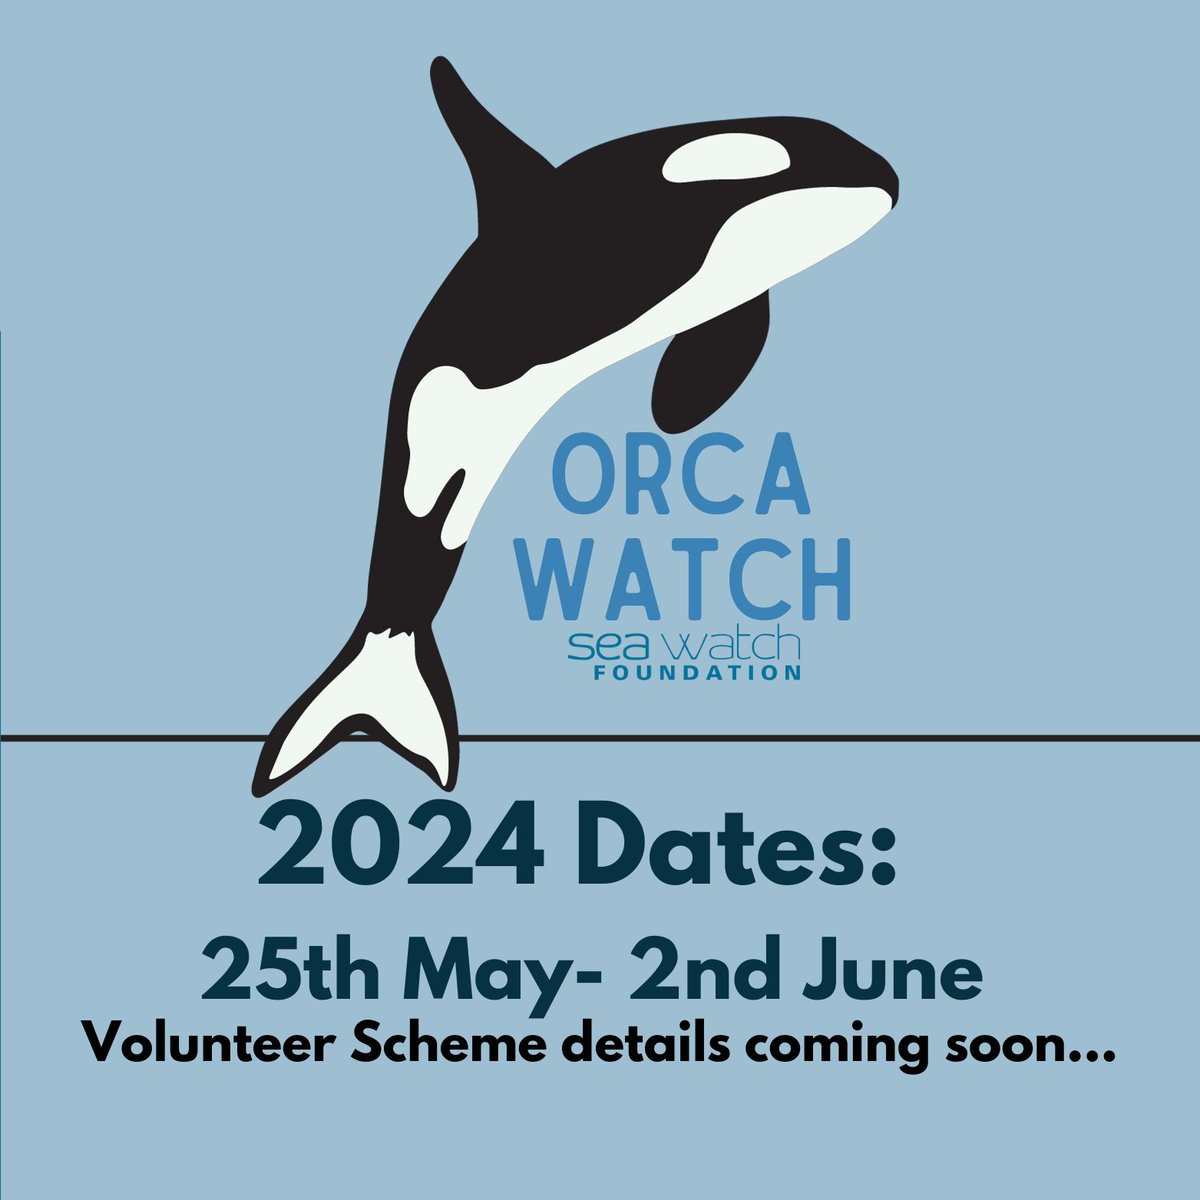 Save the date! 📷 We are excited to announce that Orca Watch 2024 will take place from Saturday the 25th May to Sunday the 2nd June 📷 Head to our website to find out more!